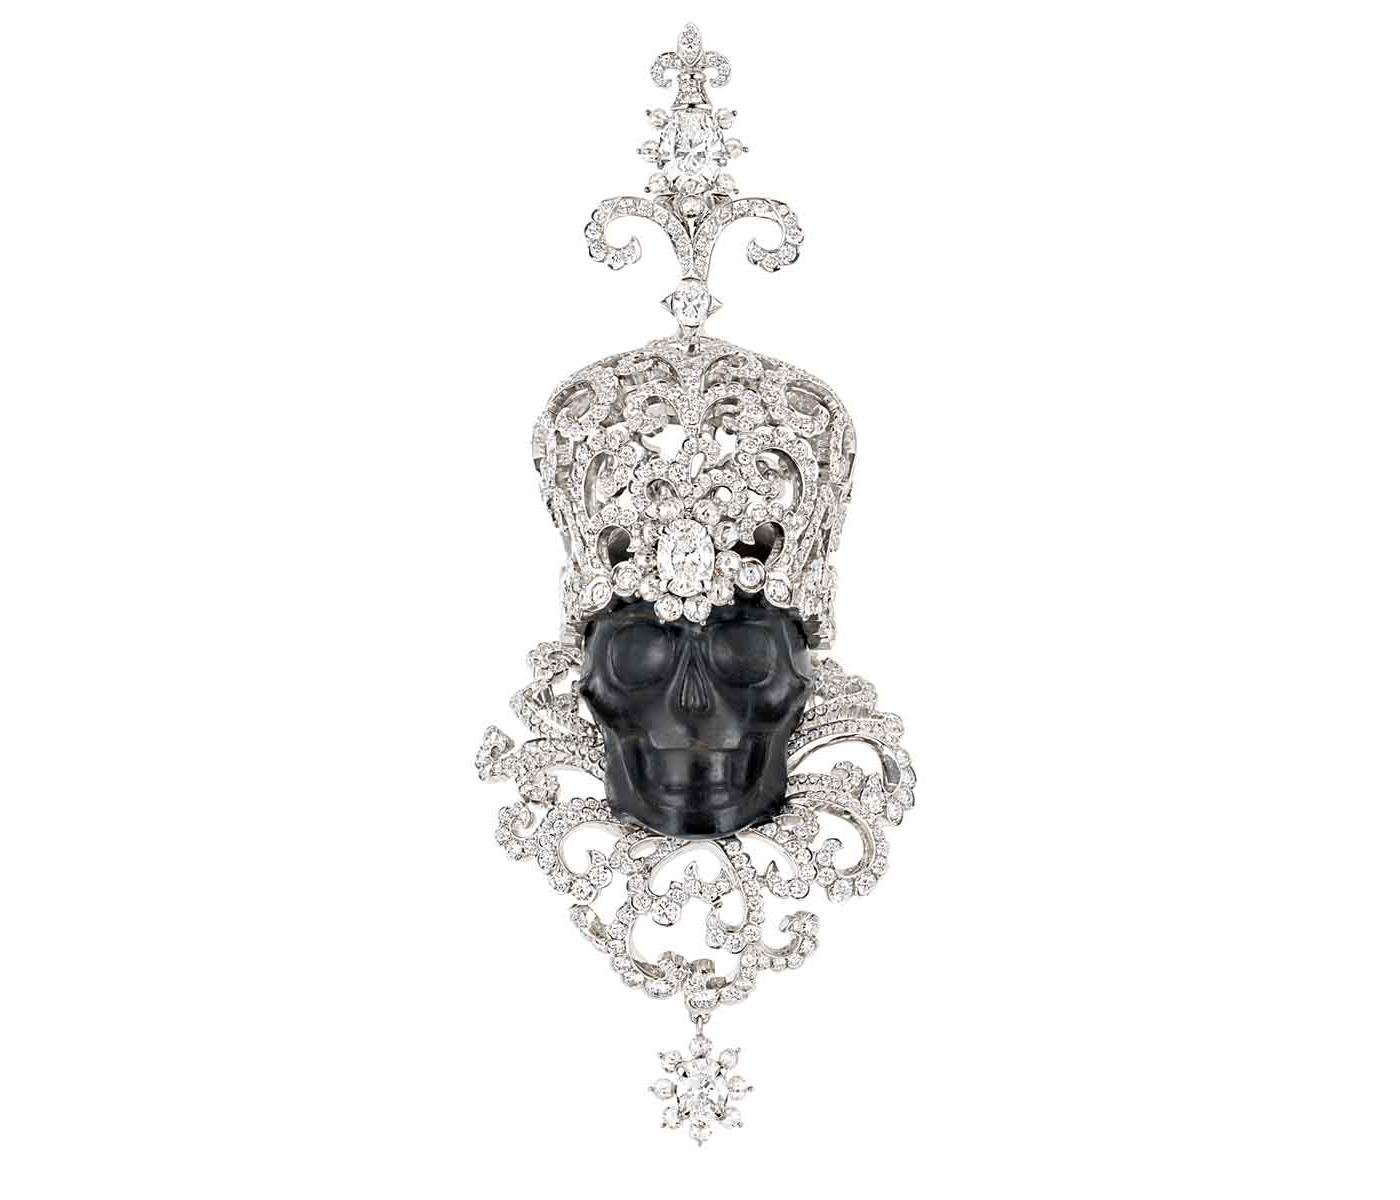 Pendant by Dior Joaillerie